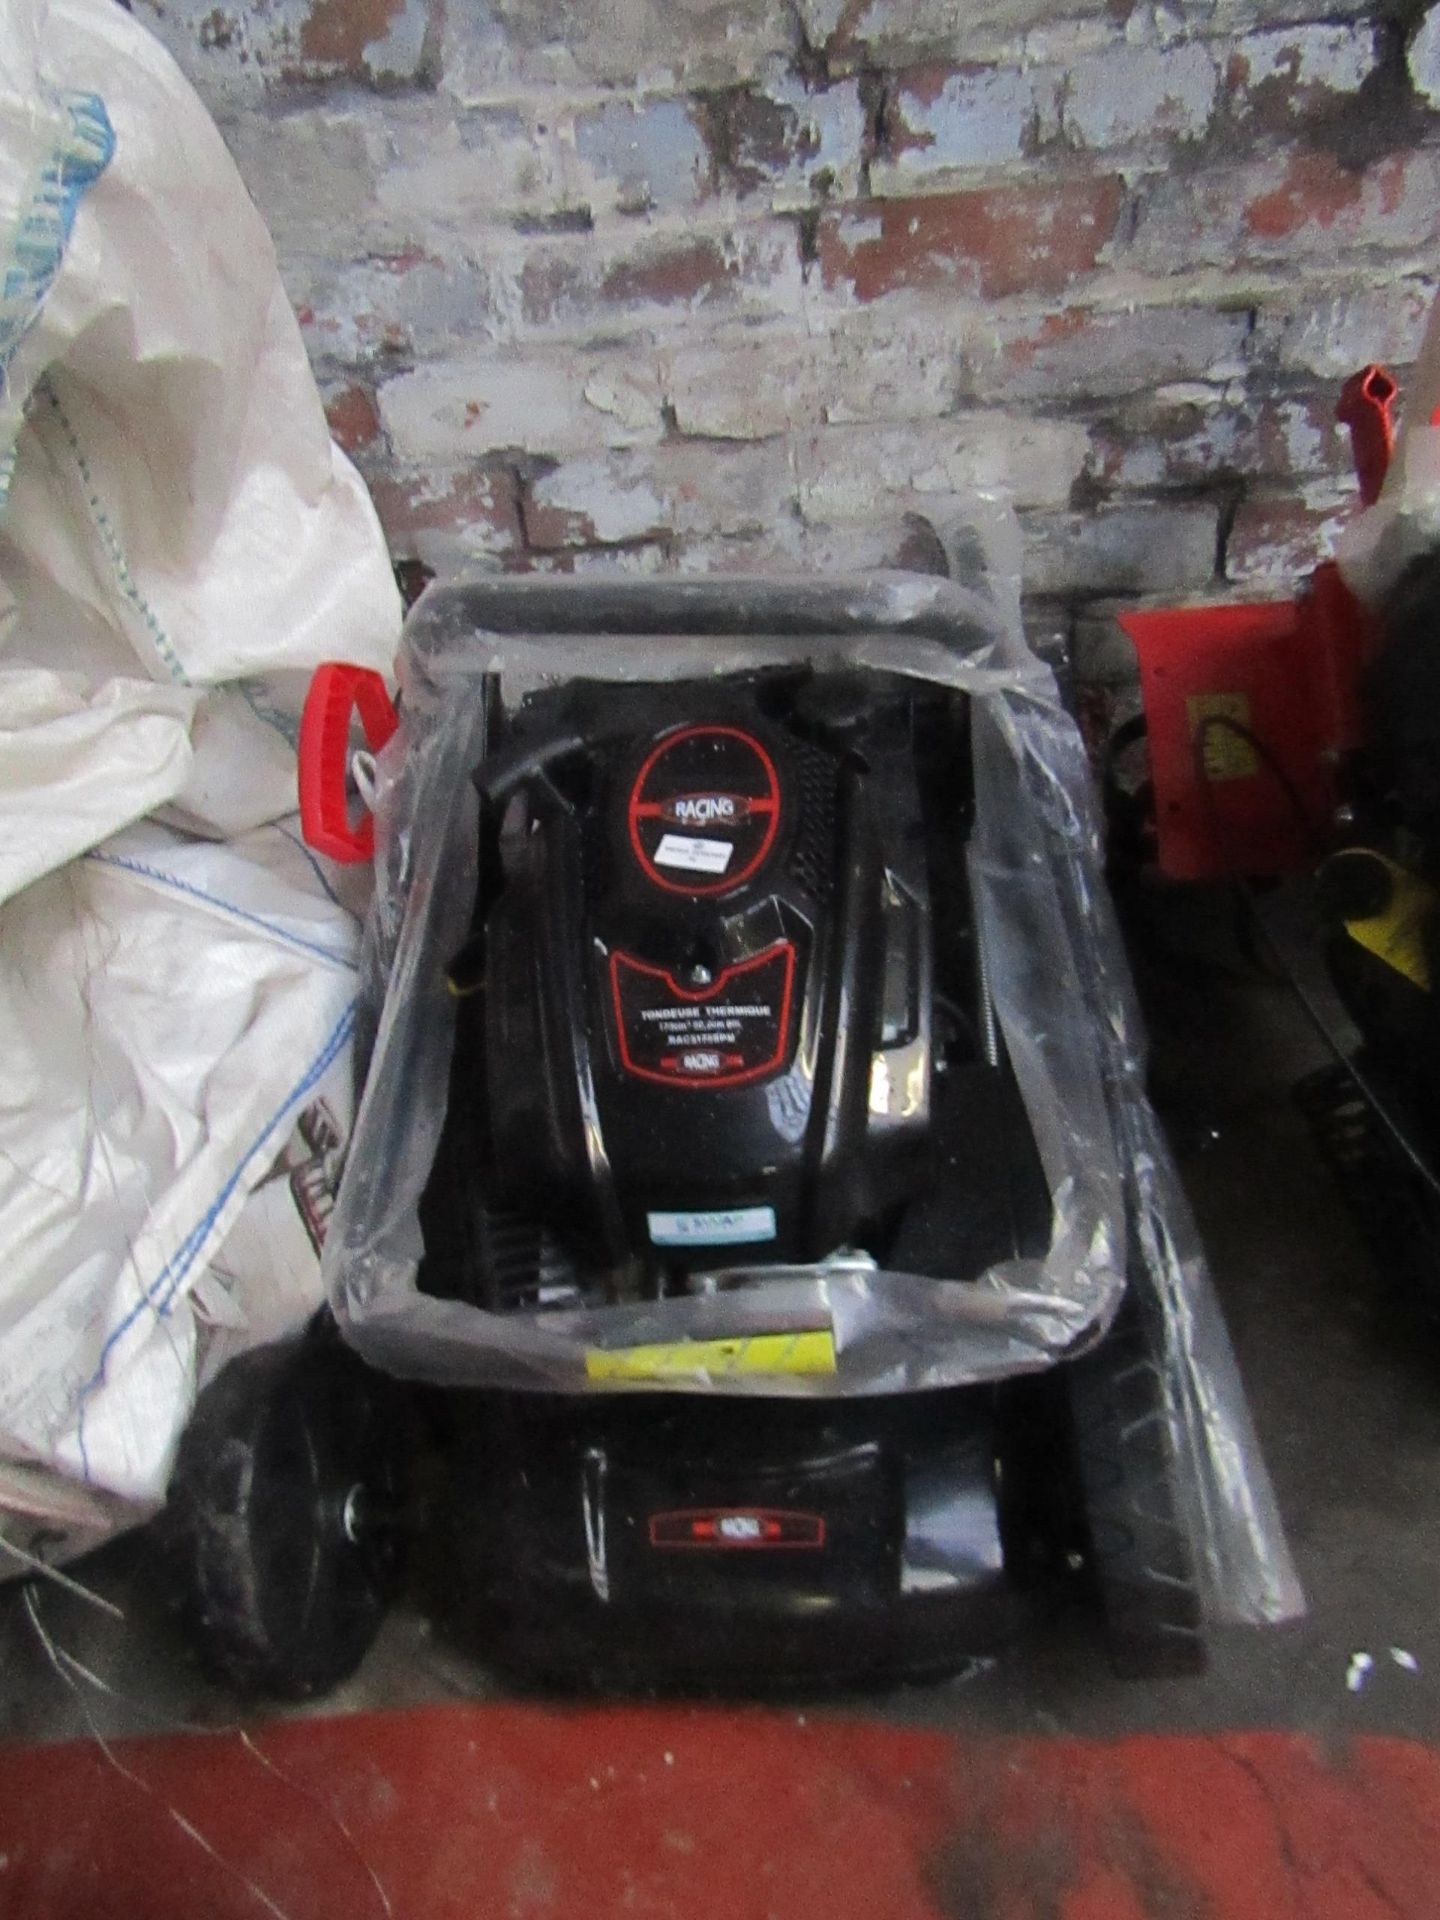 Racing RAC5175SPM petrol lawn mower, Unchecked and Untested this item is a return and the